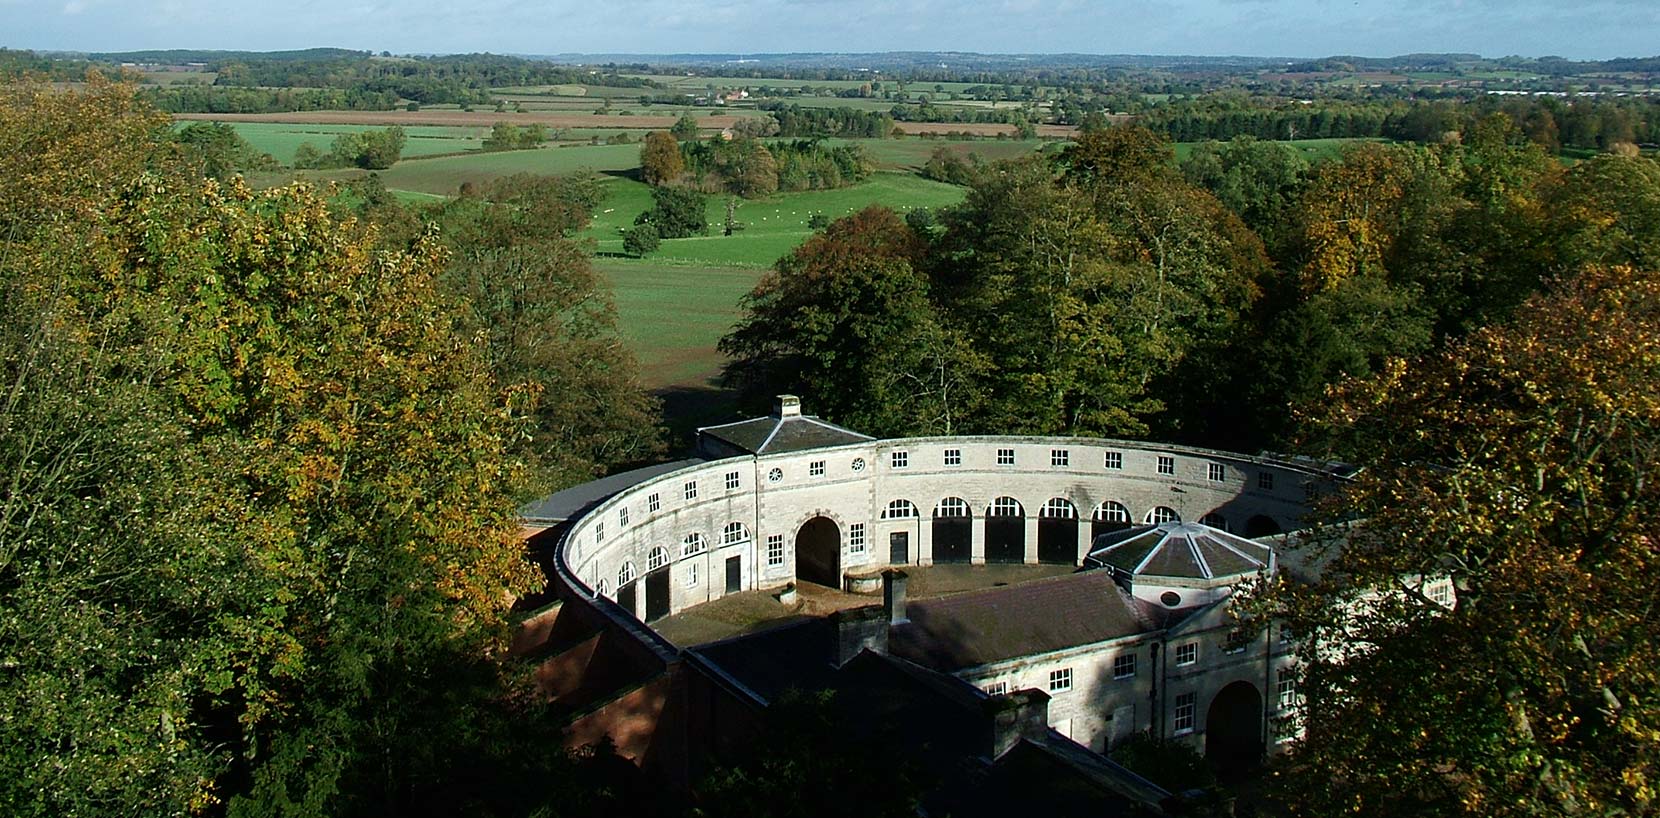 Image from the roof of Ragley Hall across the landscape